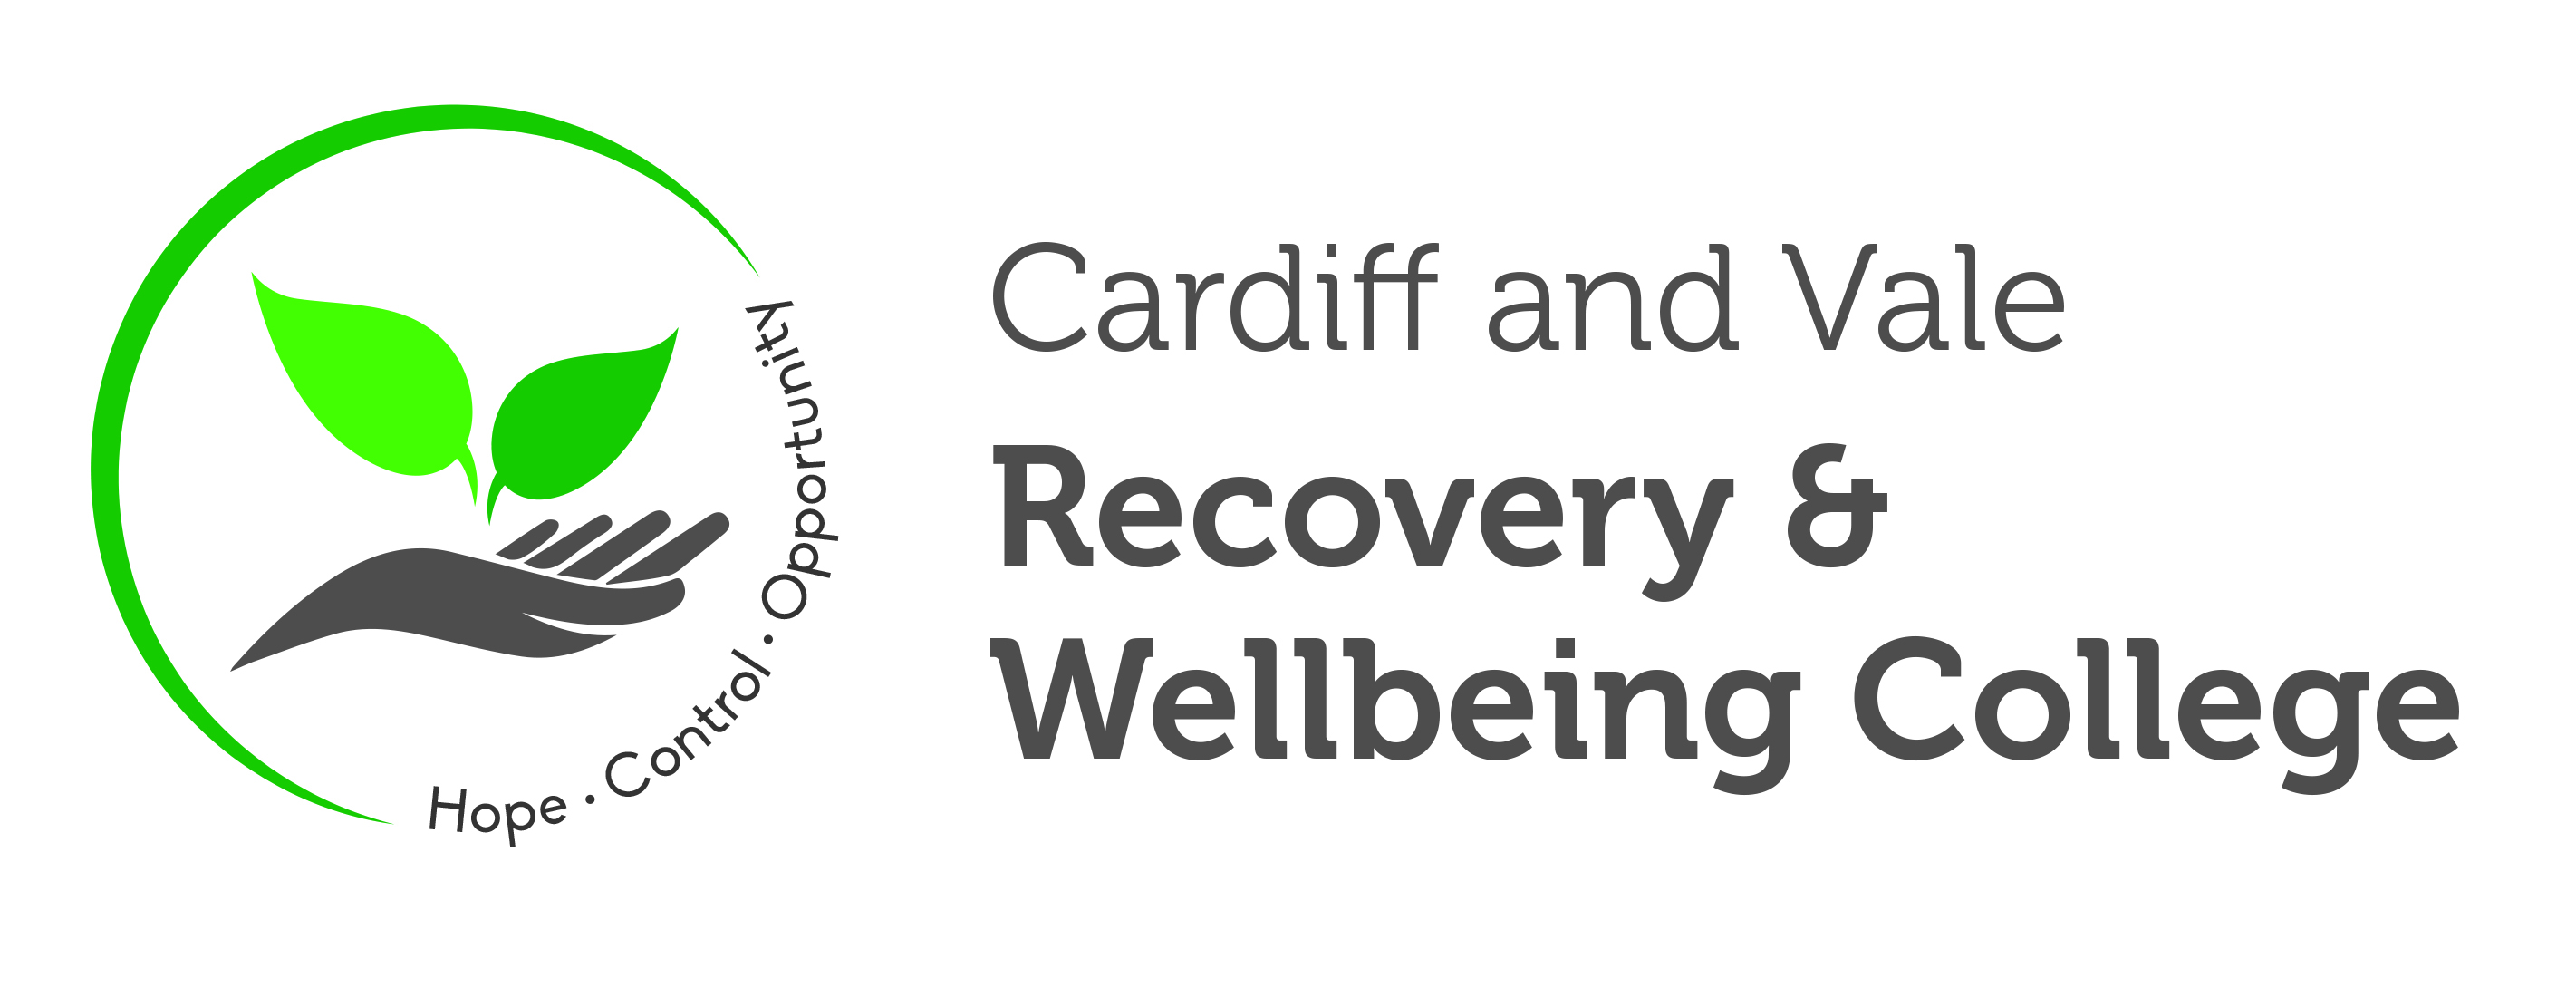 Recovery &amp; Wellbeing College Logo.jpg